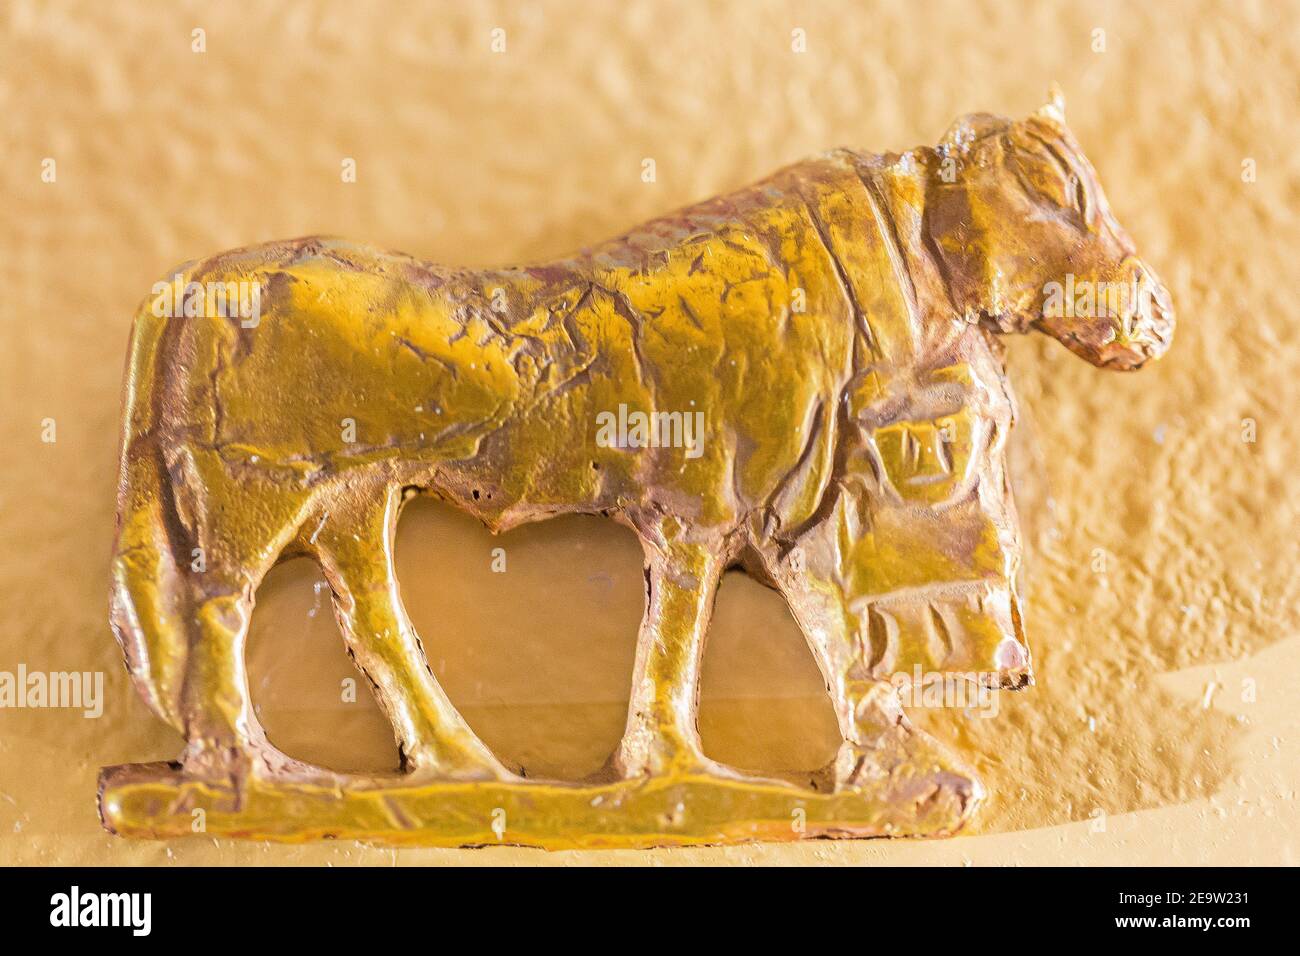 Egypt, Cairo, Egyptian Museum, gold amulet found  in a tomb of Nag el Deir,  first Dynasty : A cow. Stock Photo